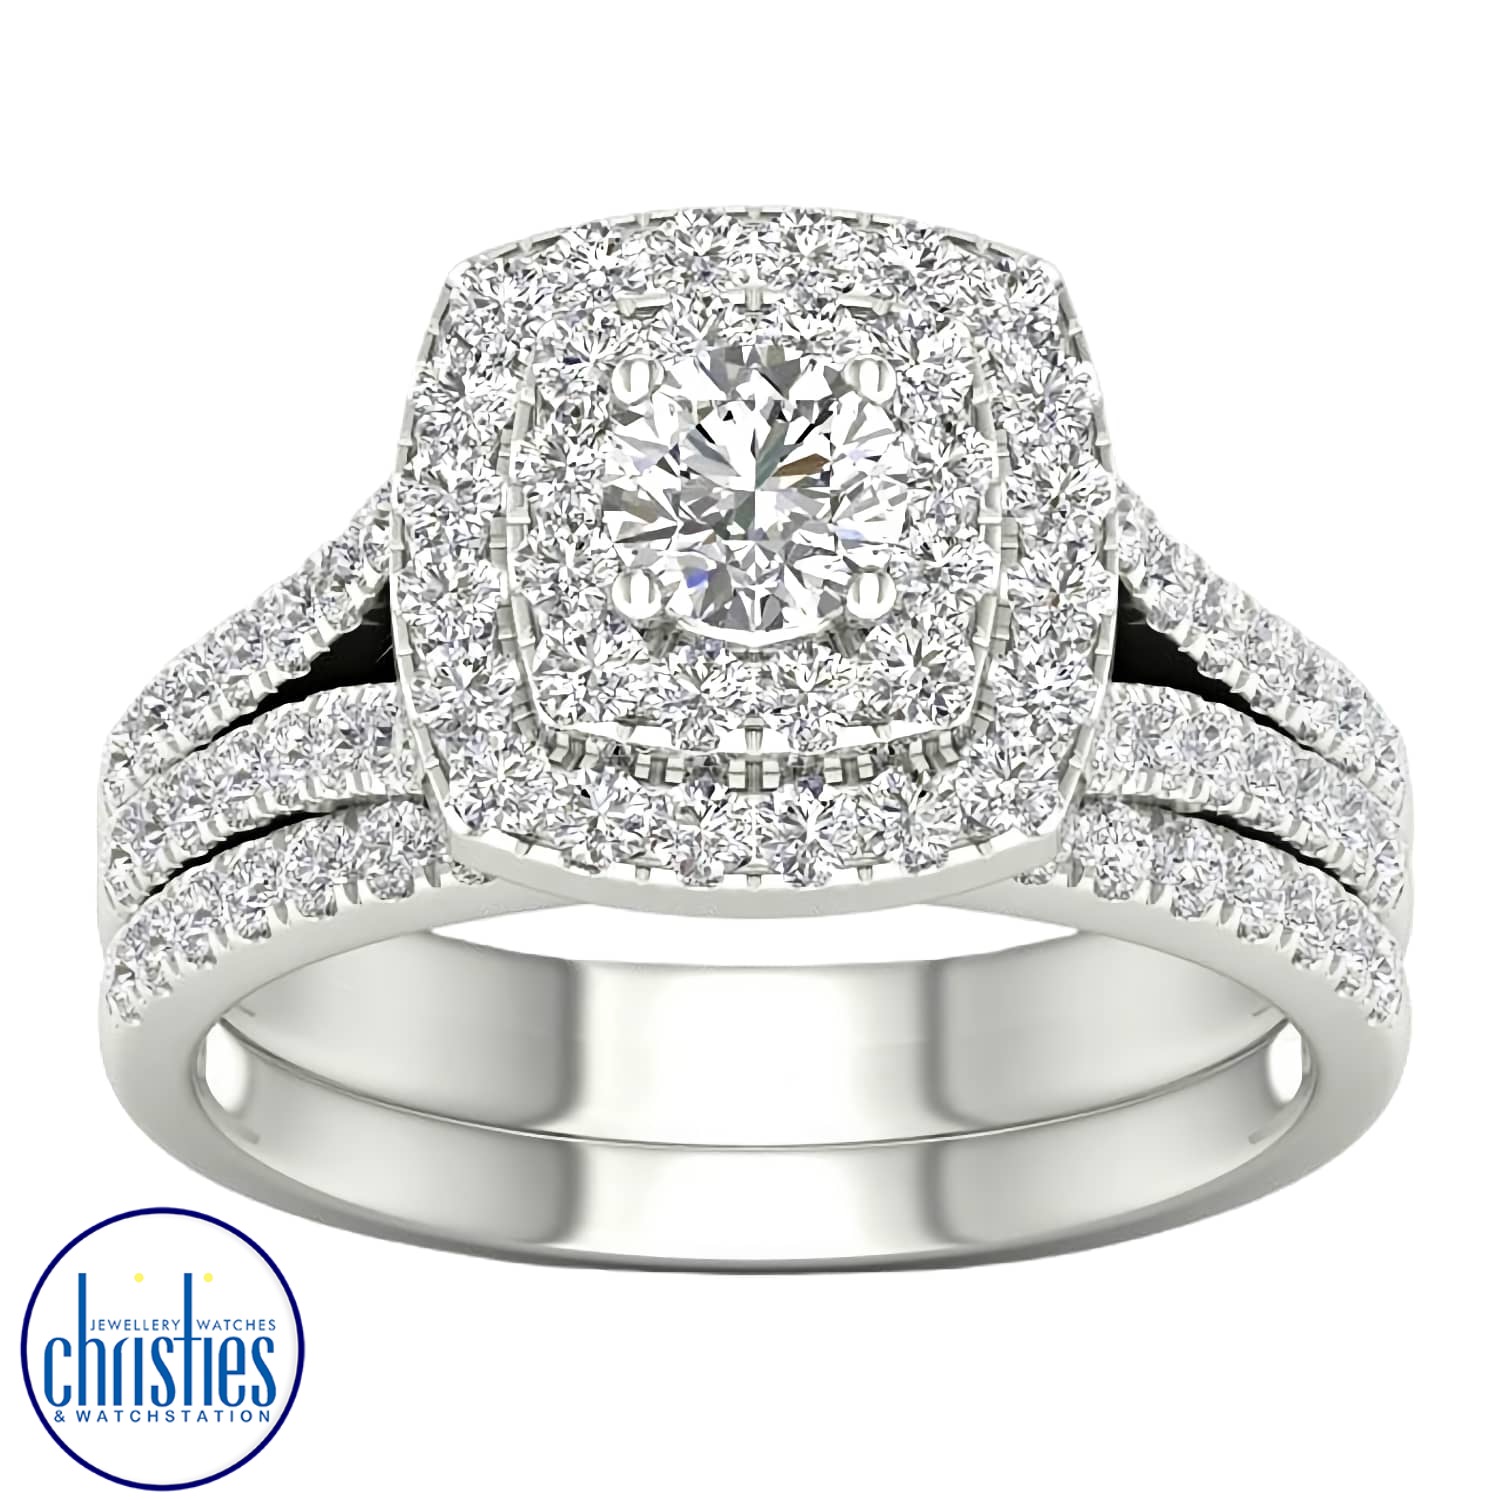 18ct White Gold Diamond Wedding Set 1.50ct TDW RB18716.  Affordable Engagement Rings Nz $8,500.00